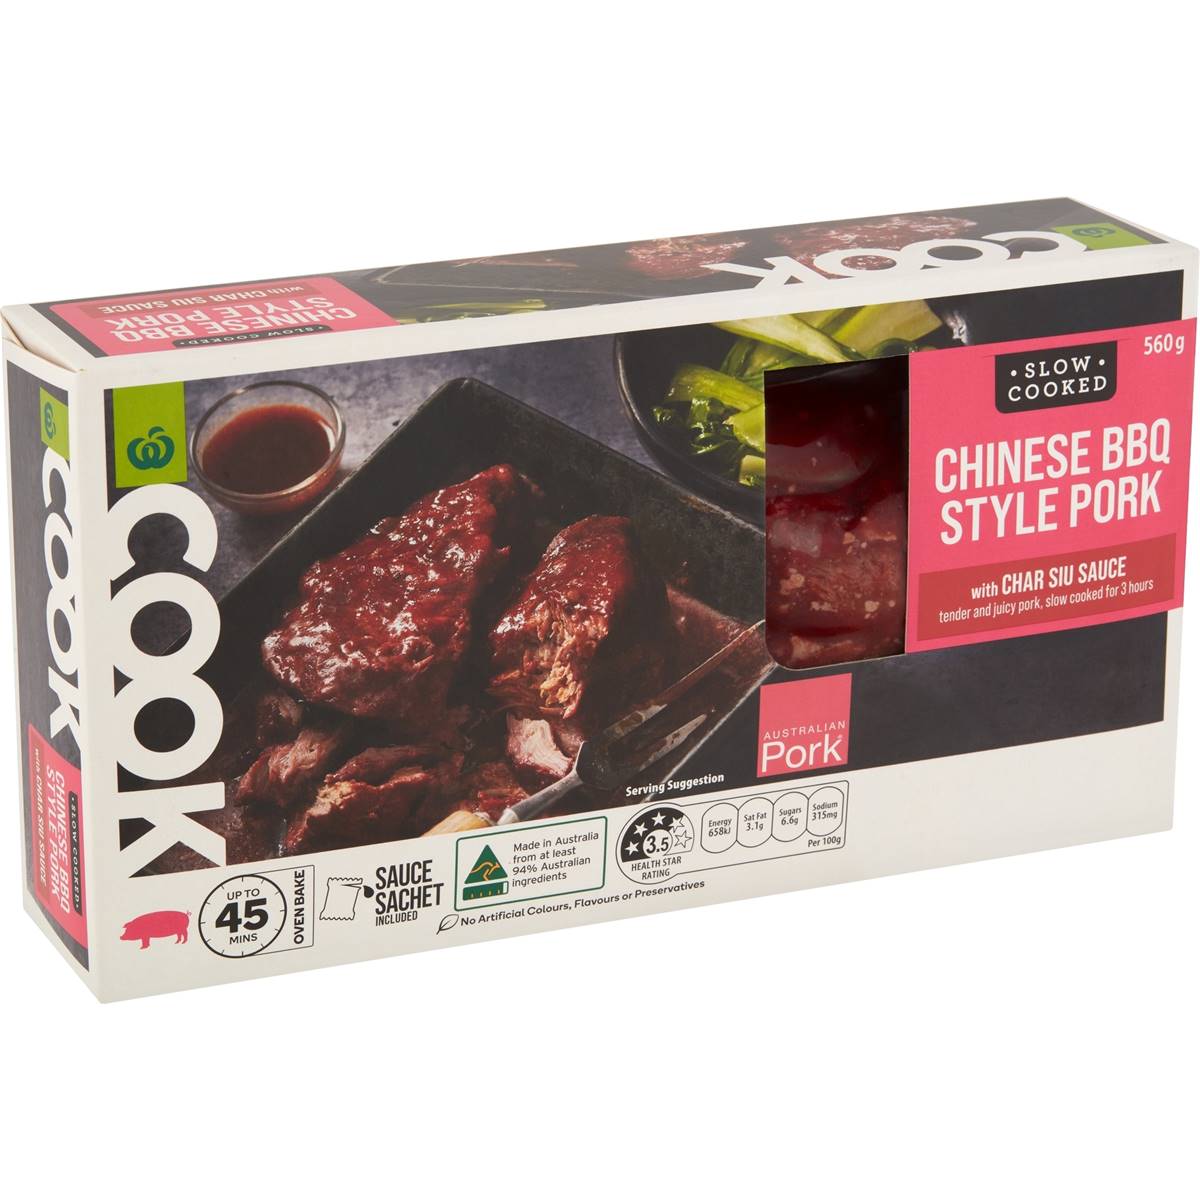 Calories in Woolworths Cook Chinese Bbq Style Pork With Char Siu Sauce